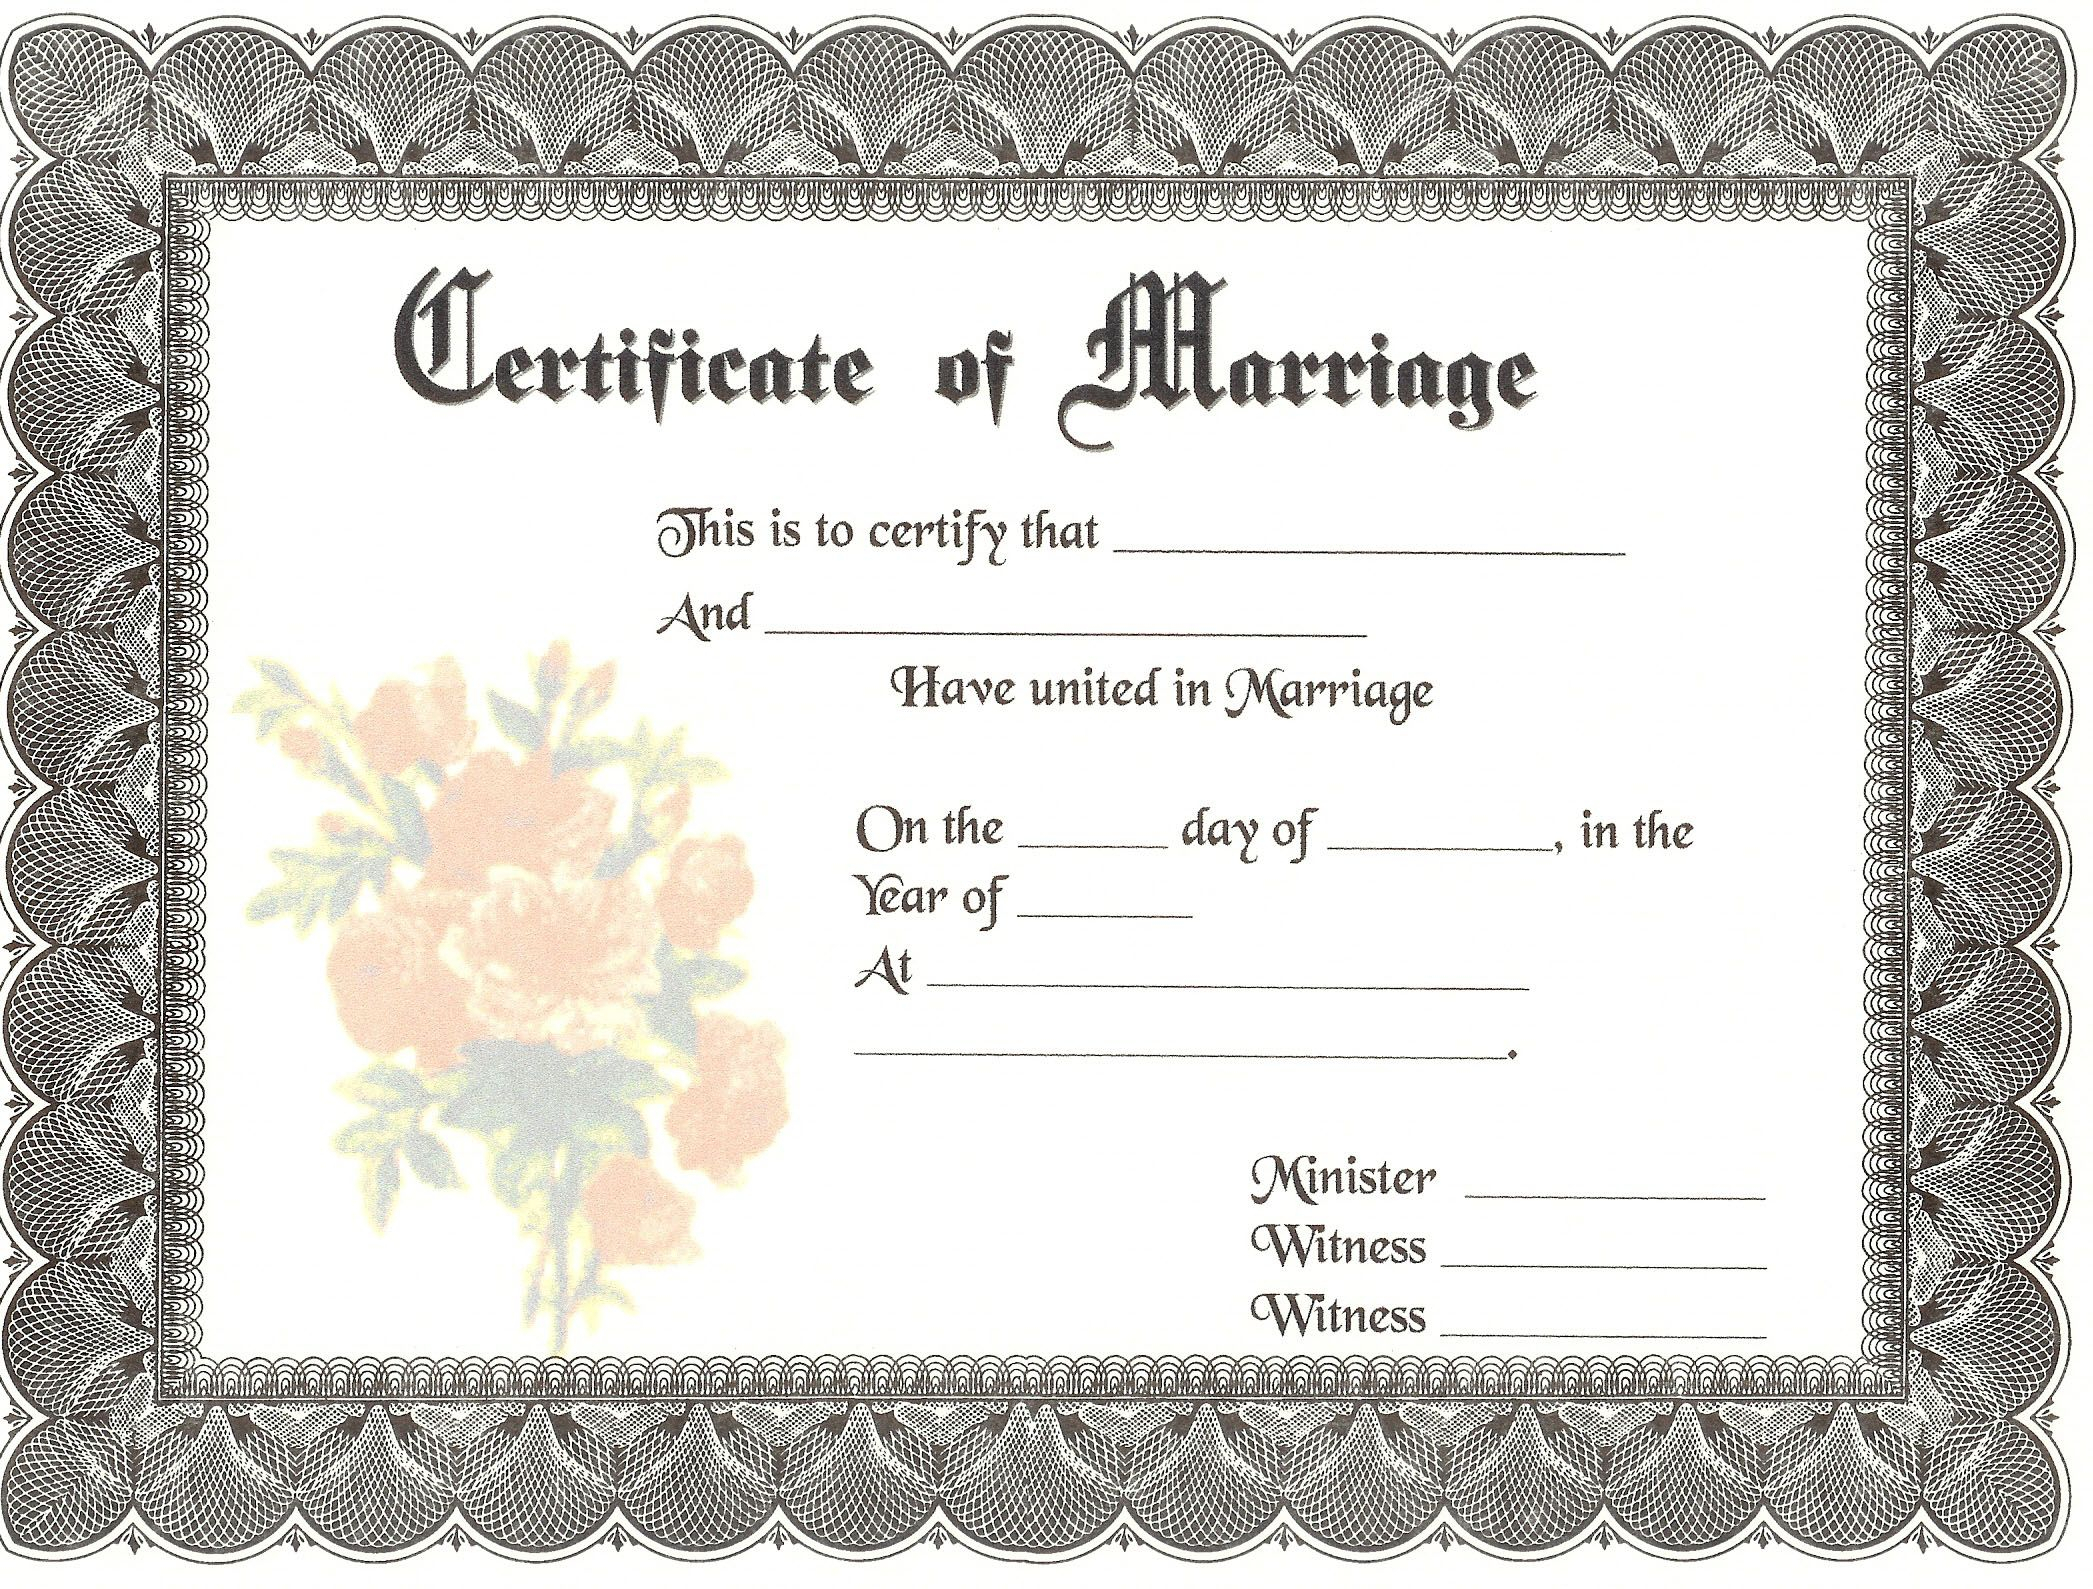 Blank Marriage Certificates | Download Blank Marriage Pertaining To Blank Marriage Certificate Template